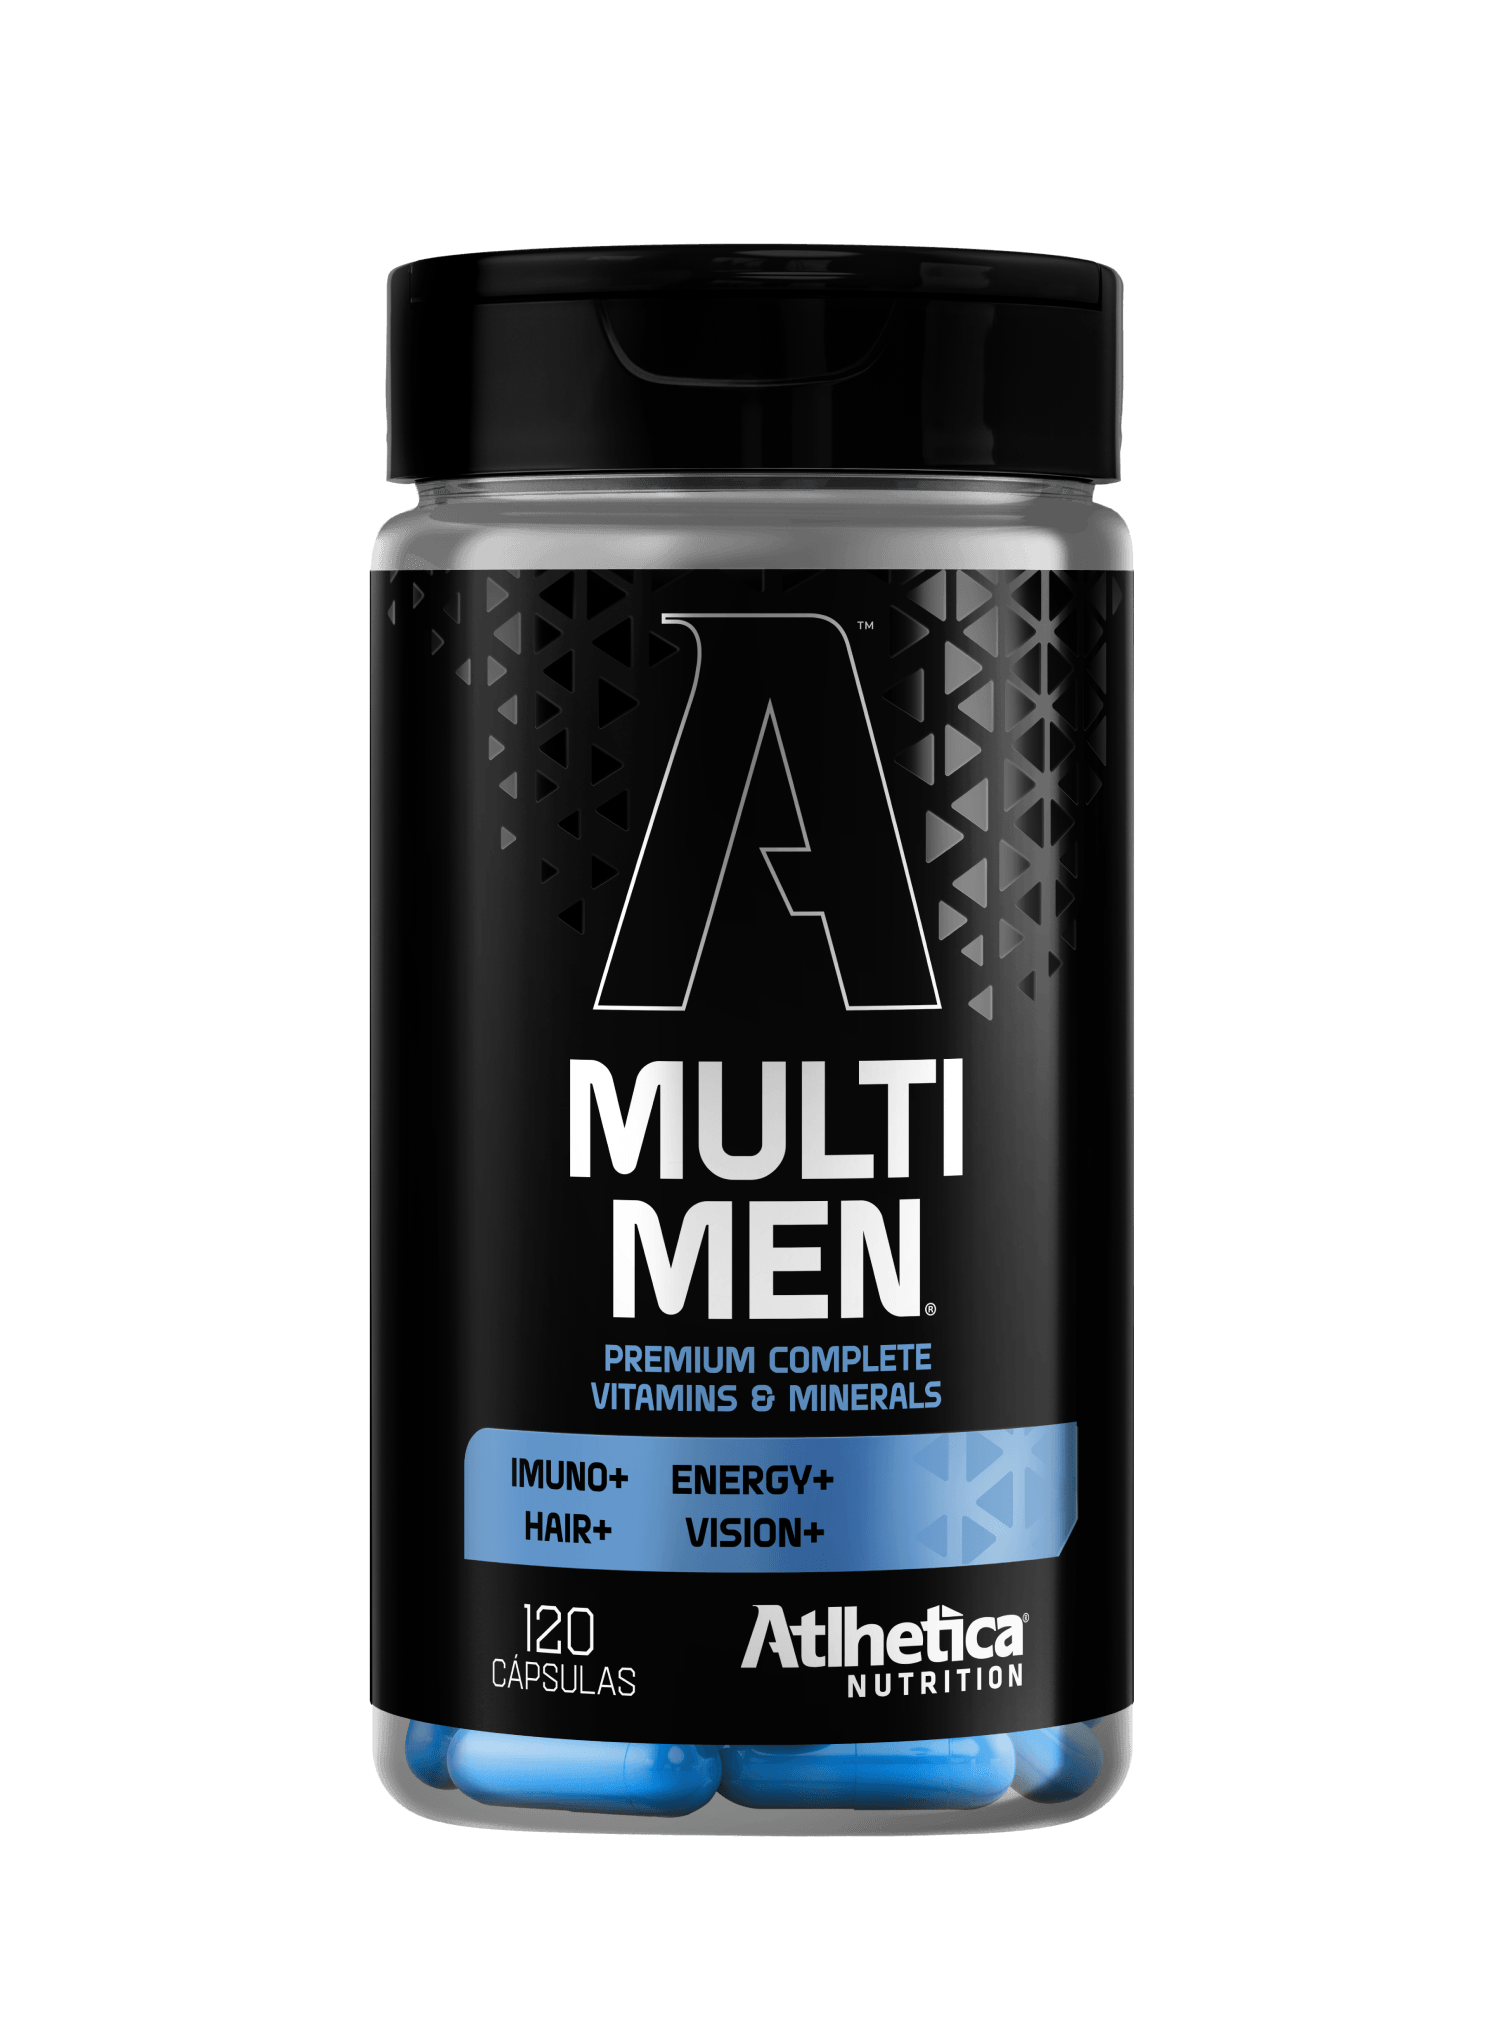 Ripped Xtreme (120 Caps) - Athletica - Atlhetica Nutrition